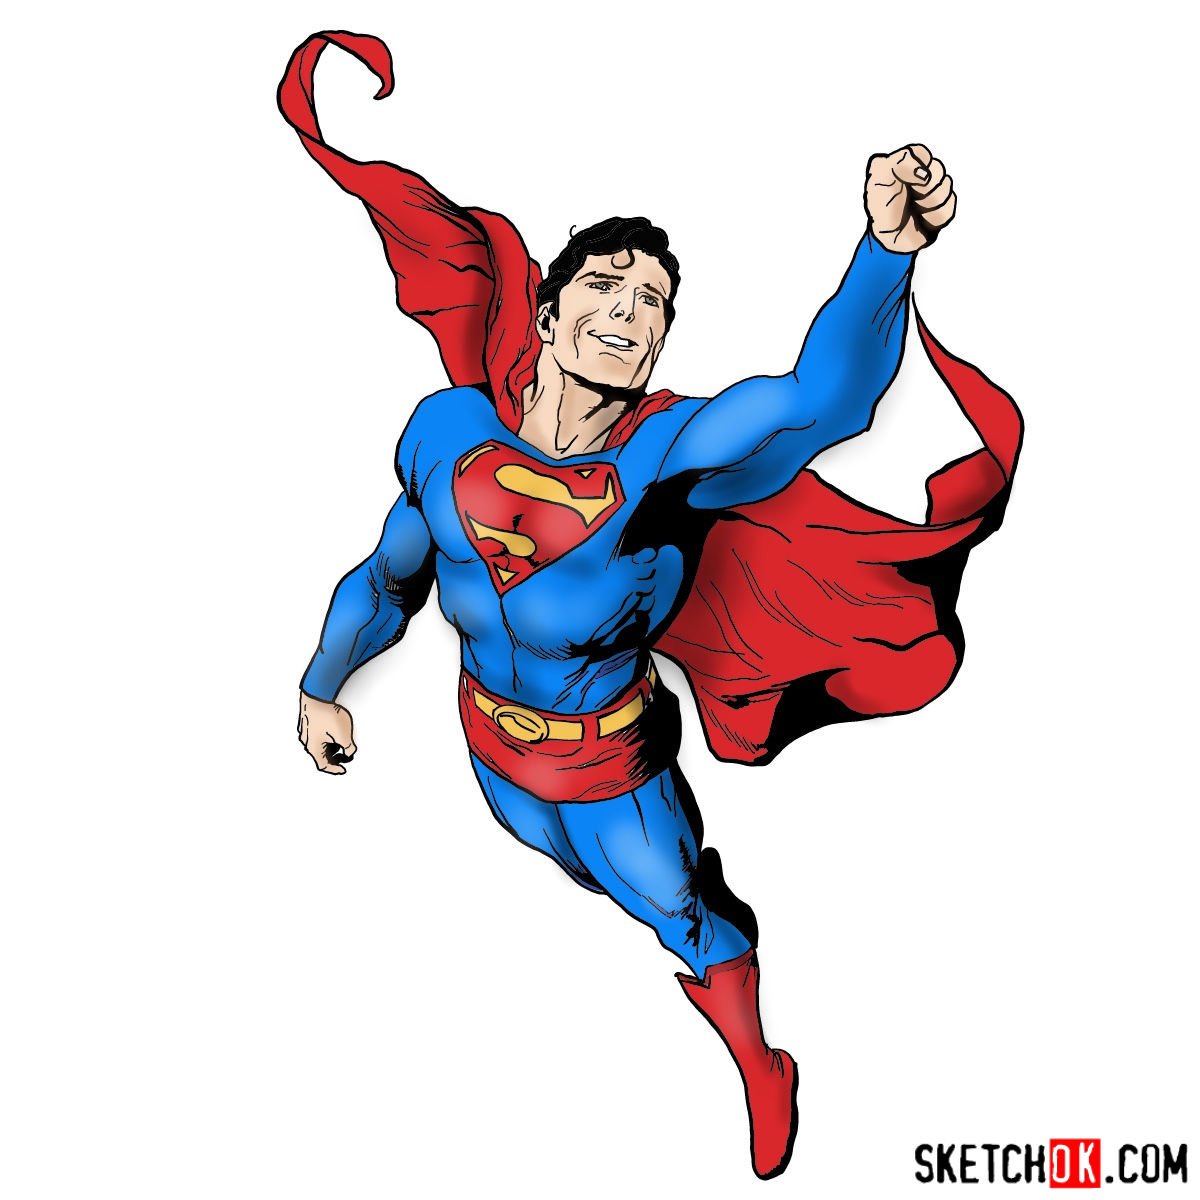 How to draw flying Superman - Sketchok easy drawing guides